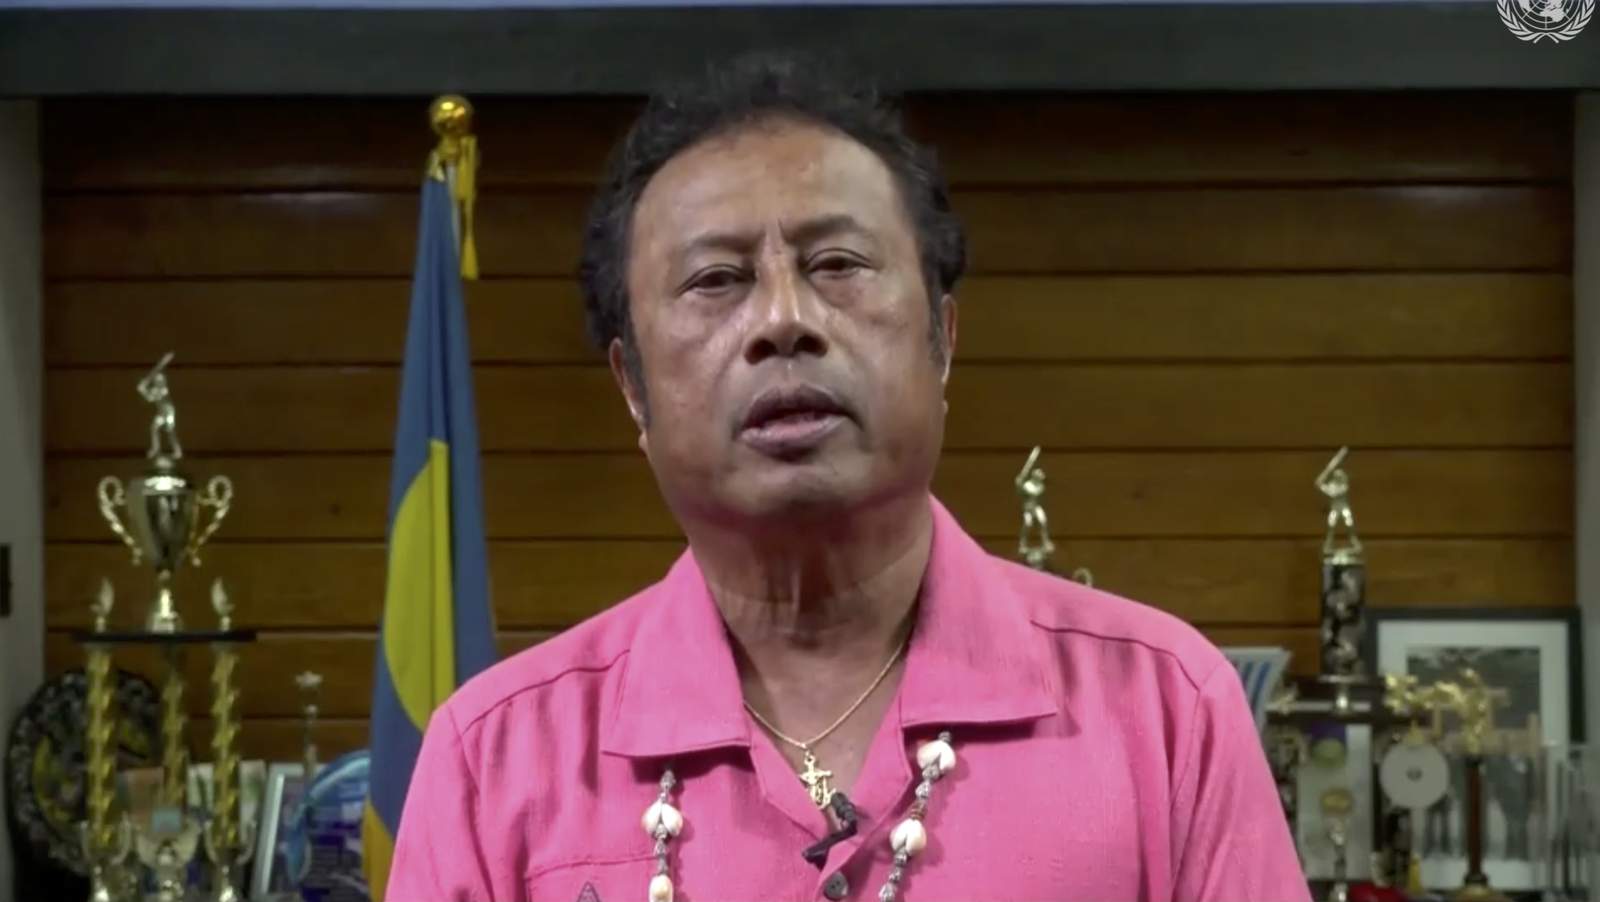 At UN, island nation of Palau speaks to interconnected world